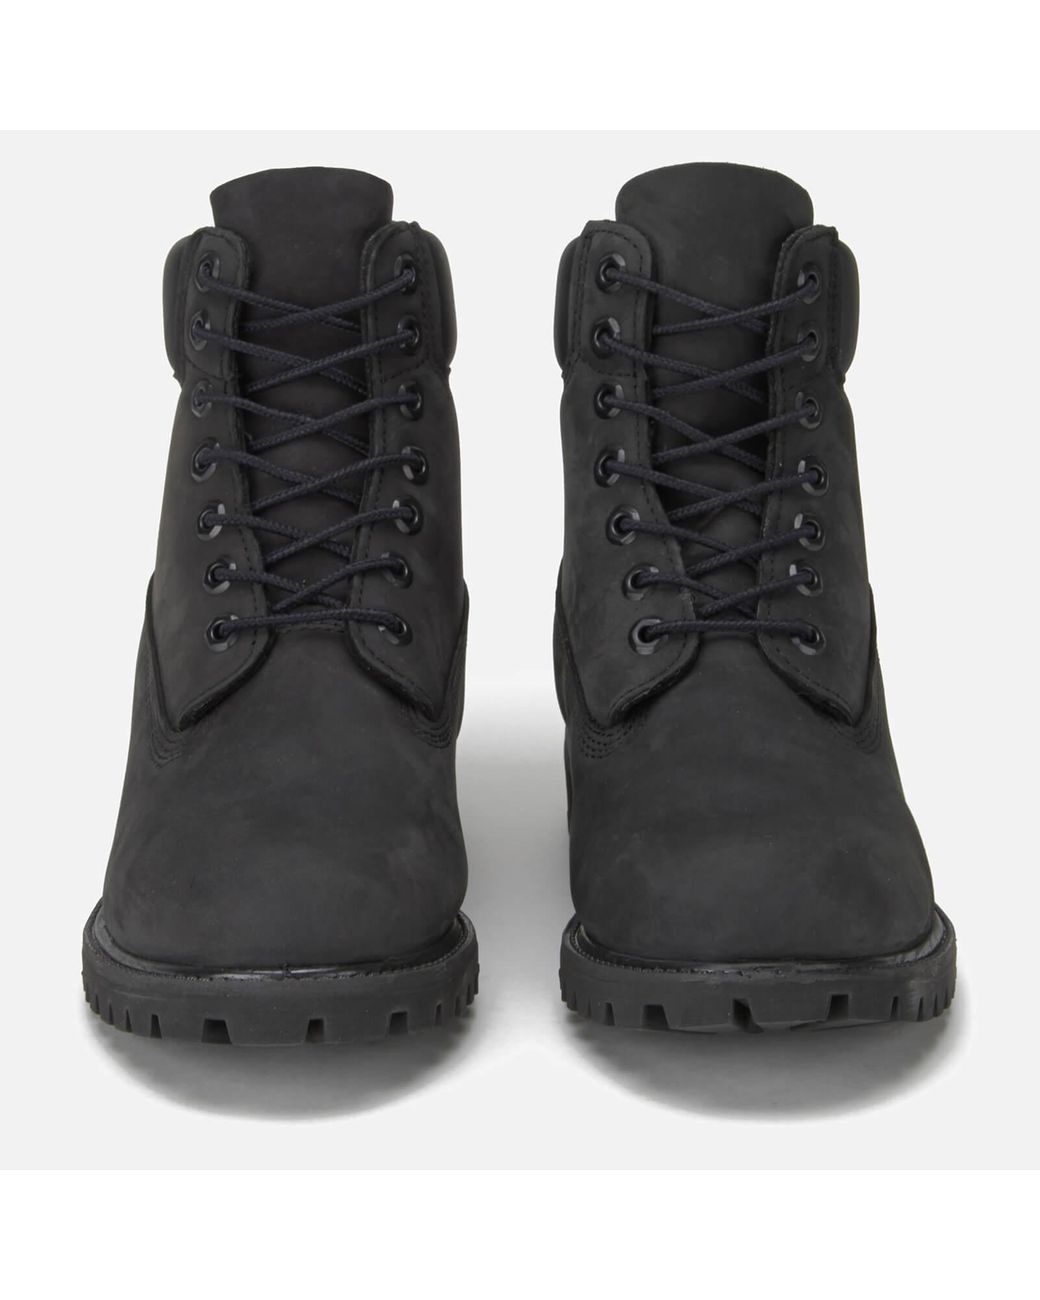 Timberland Leather 6 Inch Premium Waterproof Boots in Black for Men - Lyst